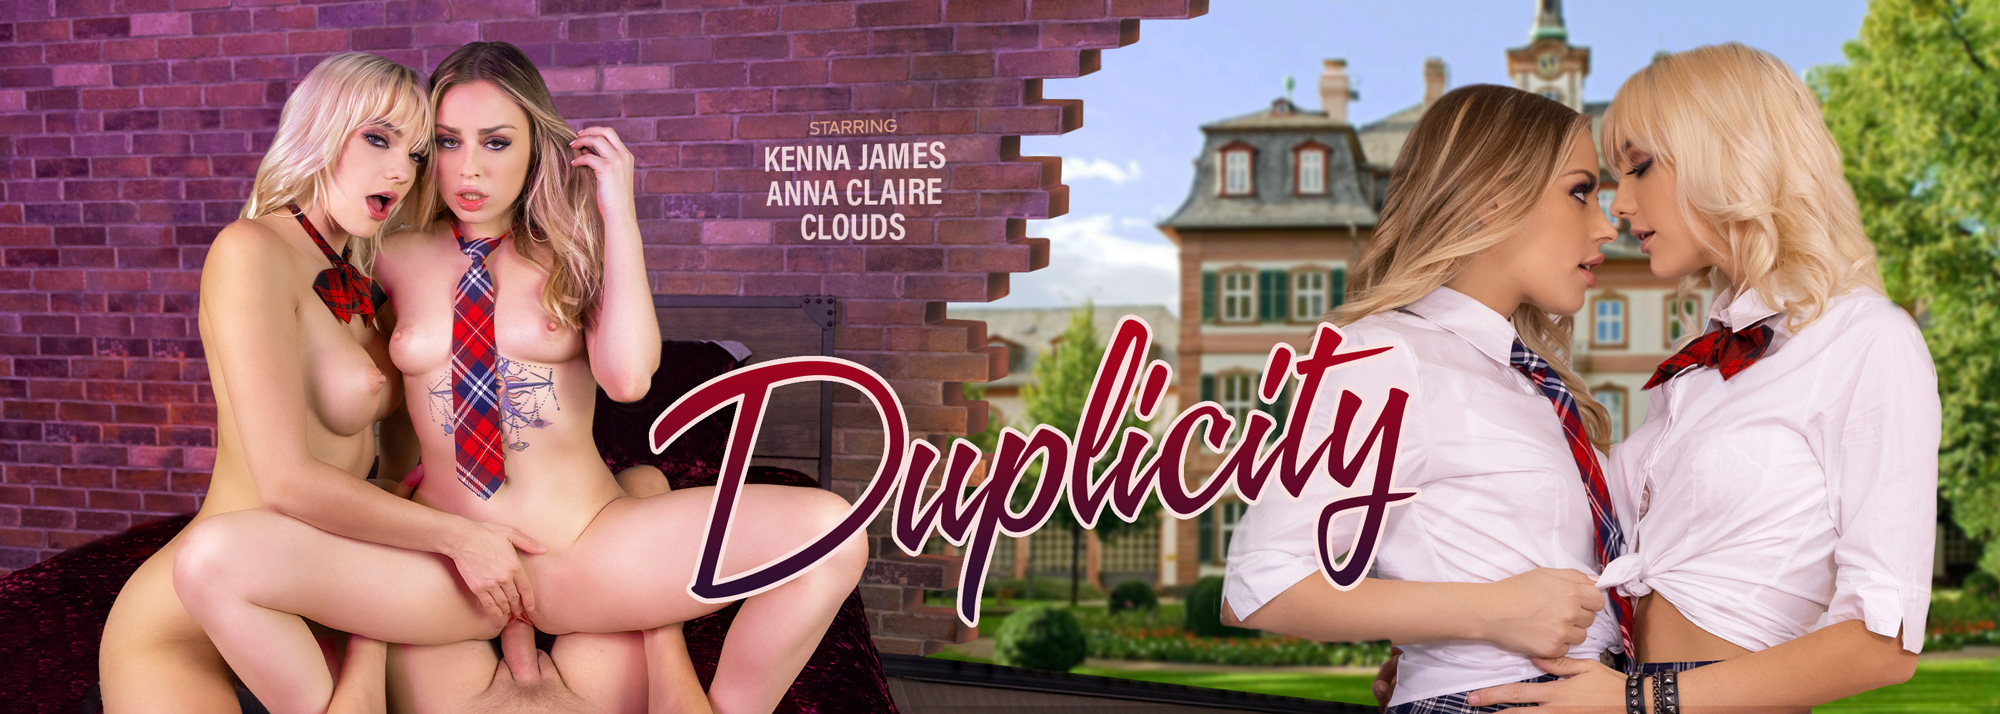 Duplicity with Anna Claire Clouds  Slideshow